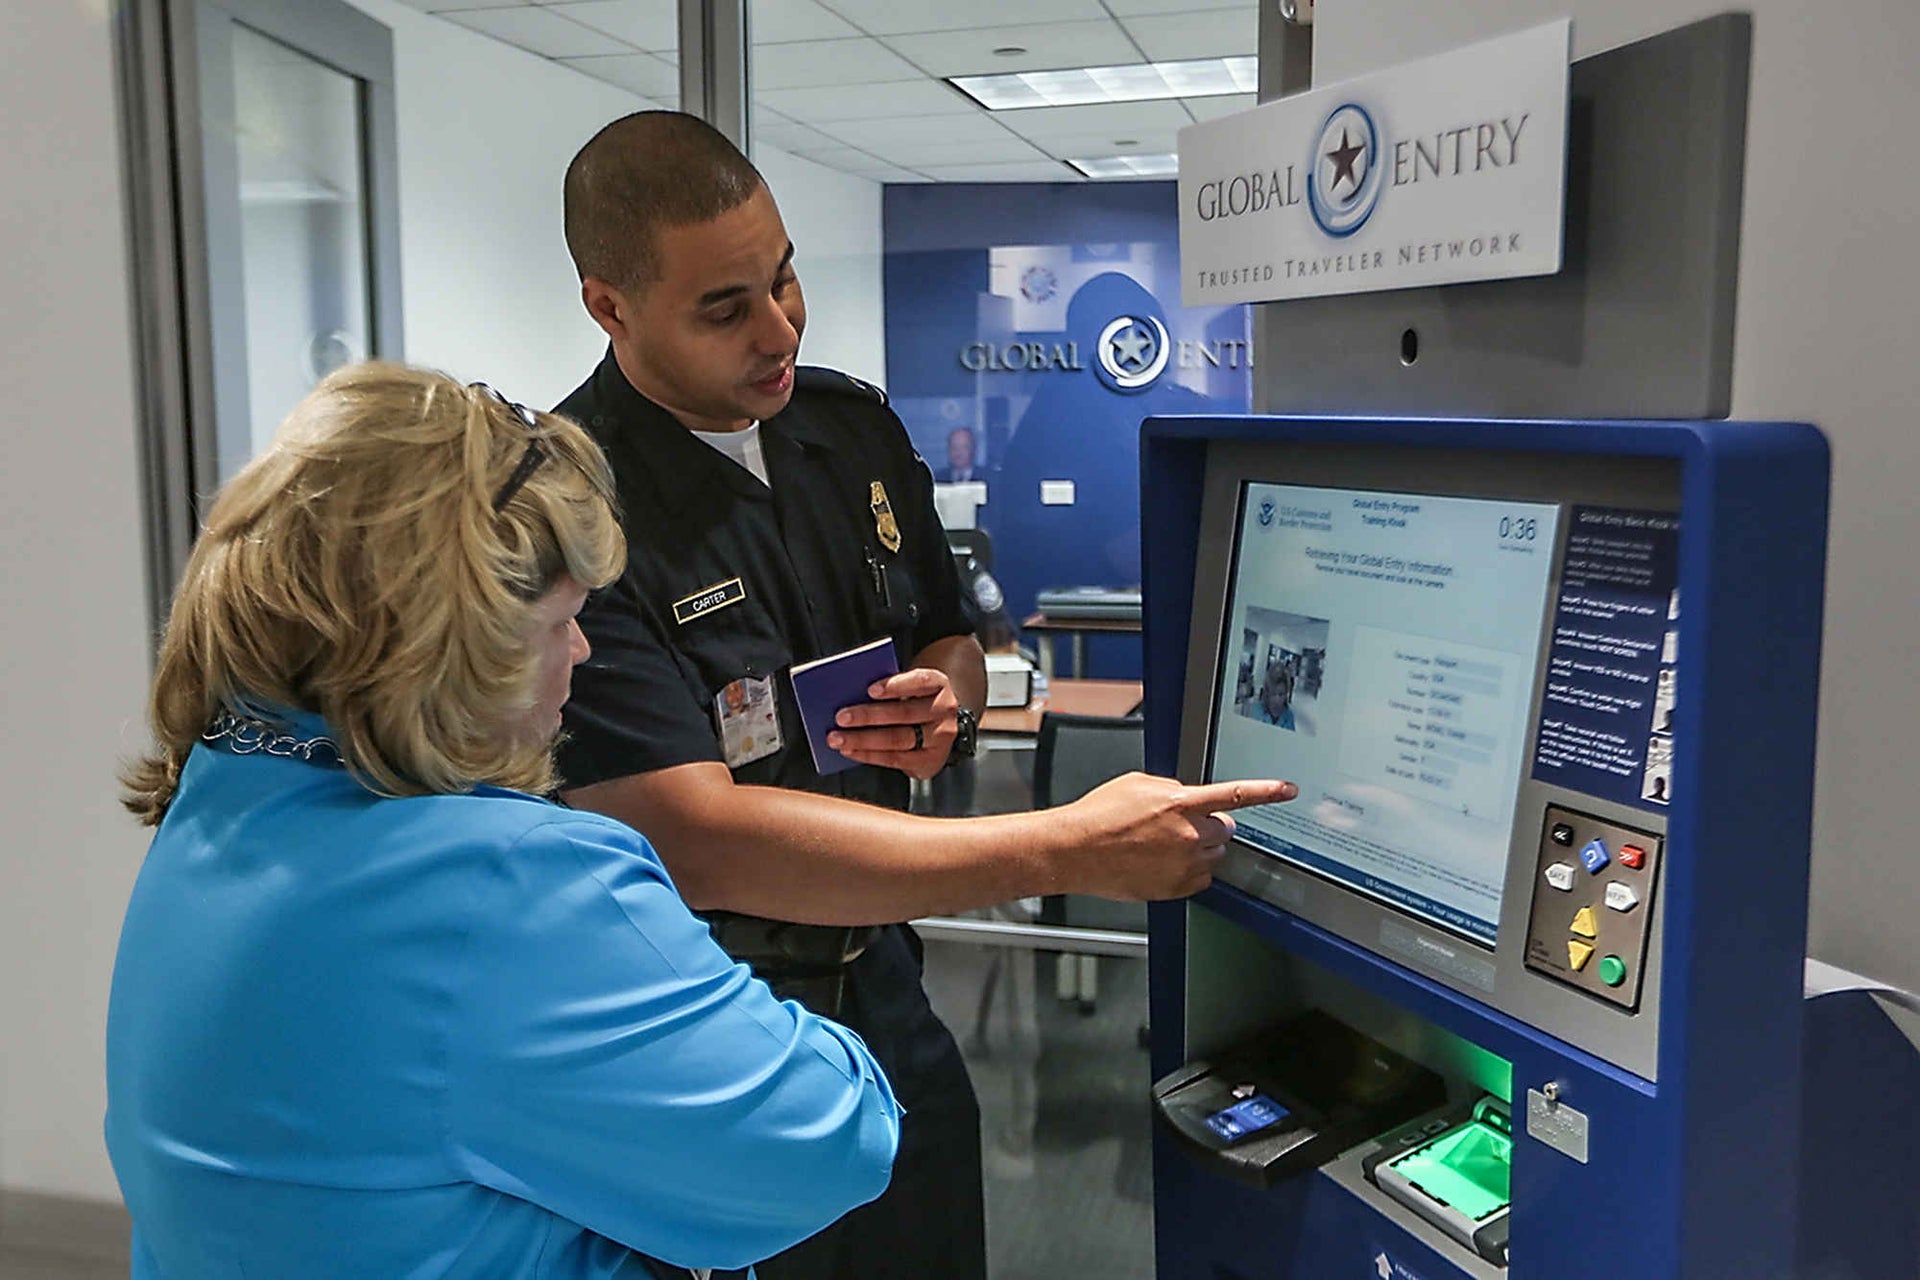 travel history global entry